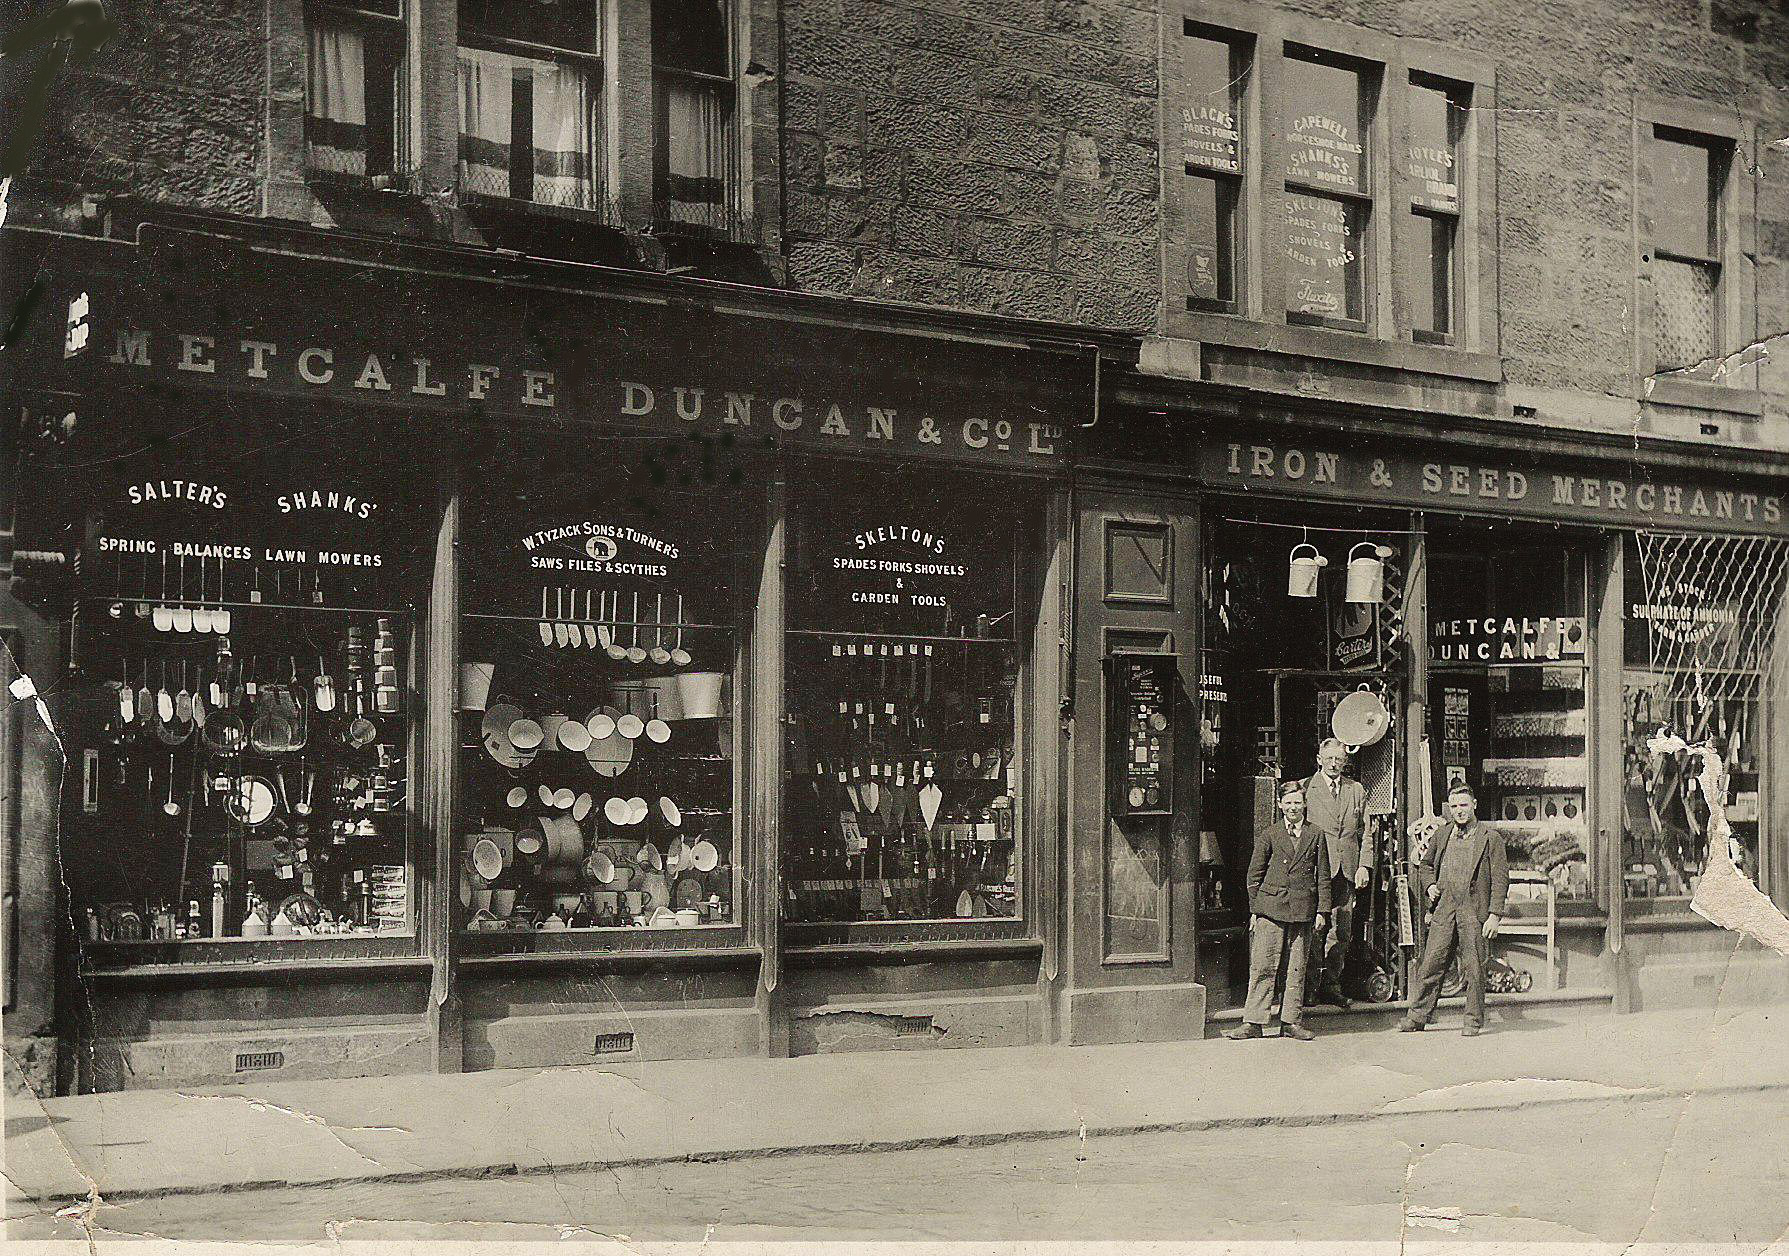 Metcalfe & Duncan were an ironmongery business in Dalkeith, Midlothian, Scotland. My father William Wight served his apprenticeship there, and (war service apart) worked as an ironmonger all his working life. He is on the right of this photo which was probably taken mid 1930s. If my memory is correct the chap on the left was called Eric Hunter and the man in the middle was the manager whose name I don't recall. View full size.